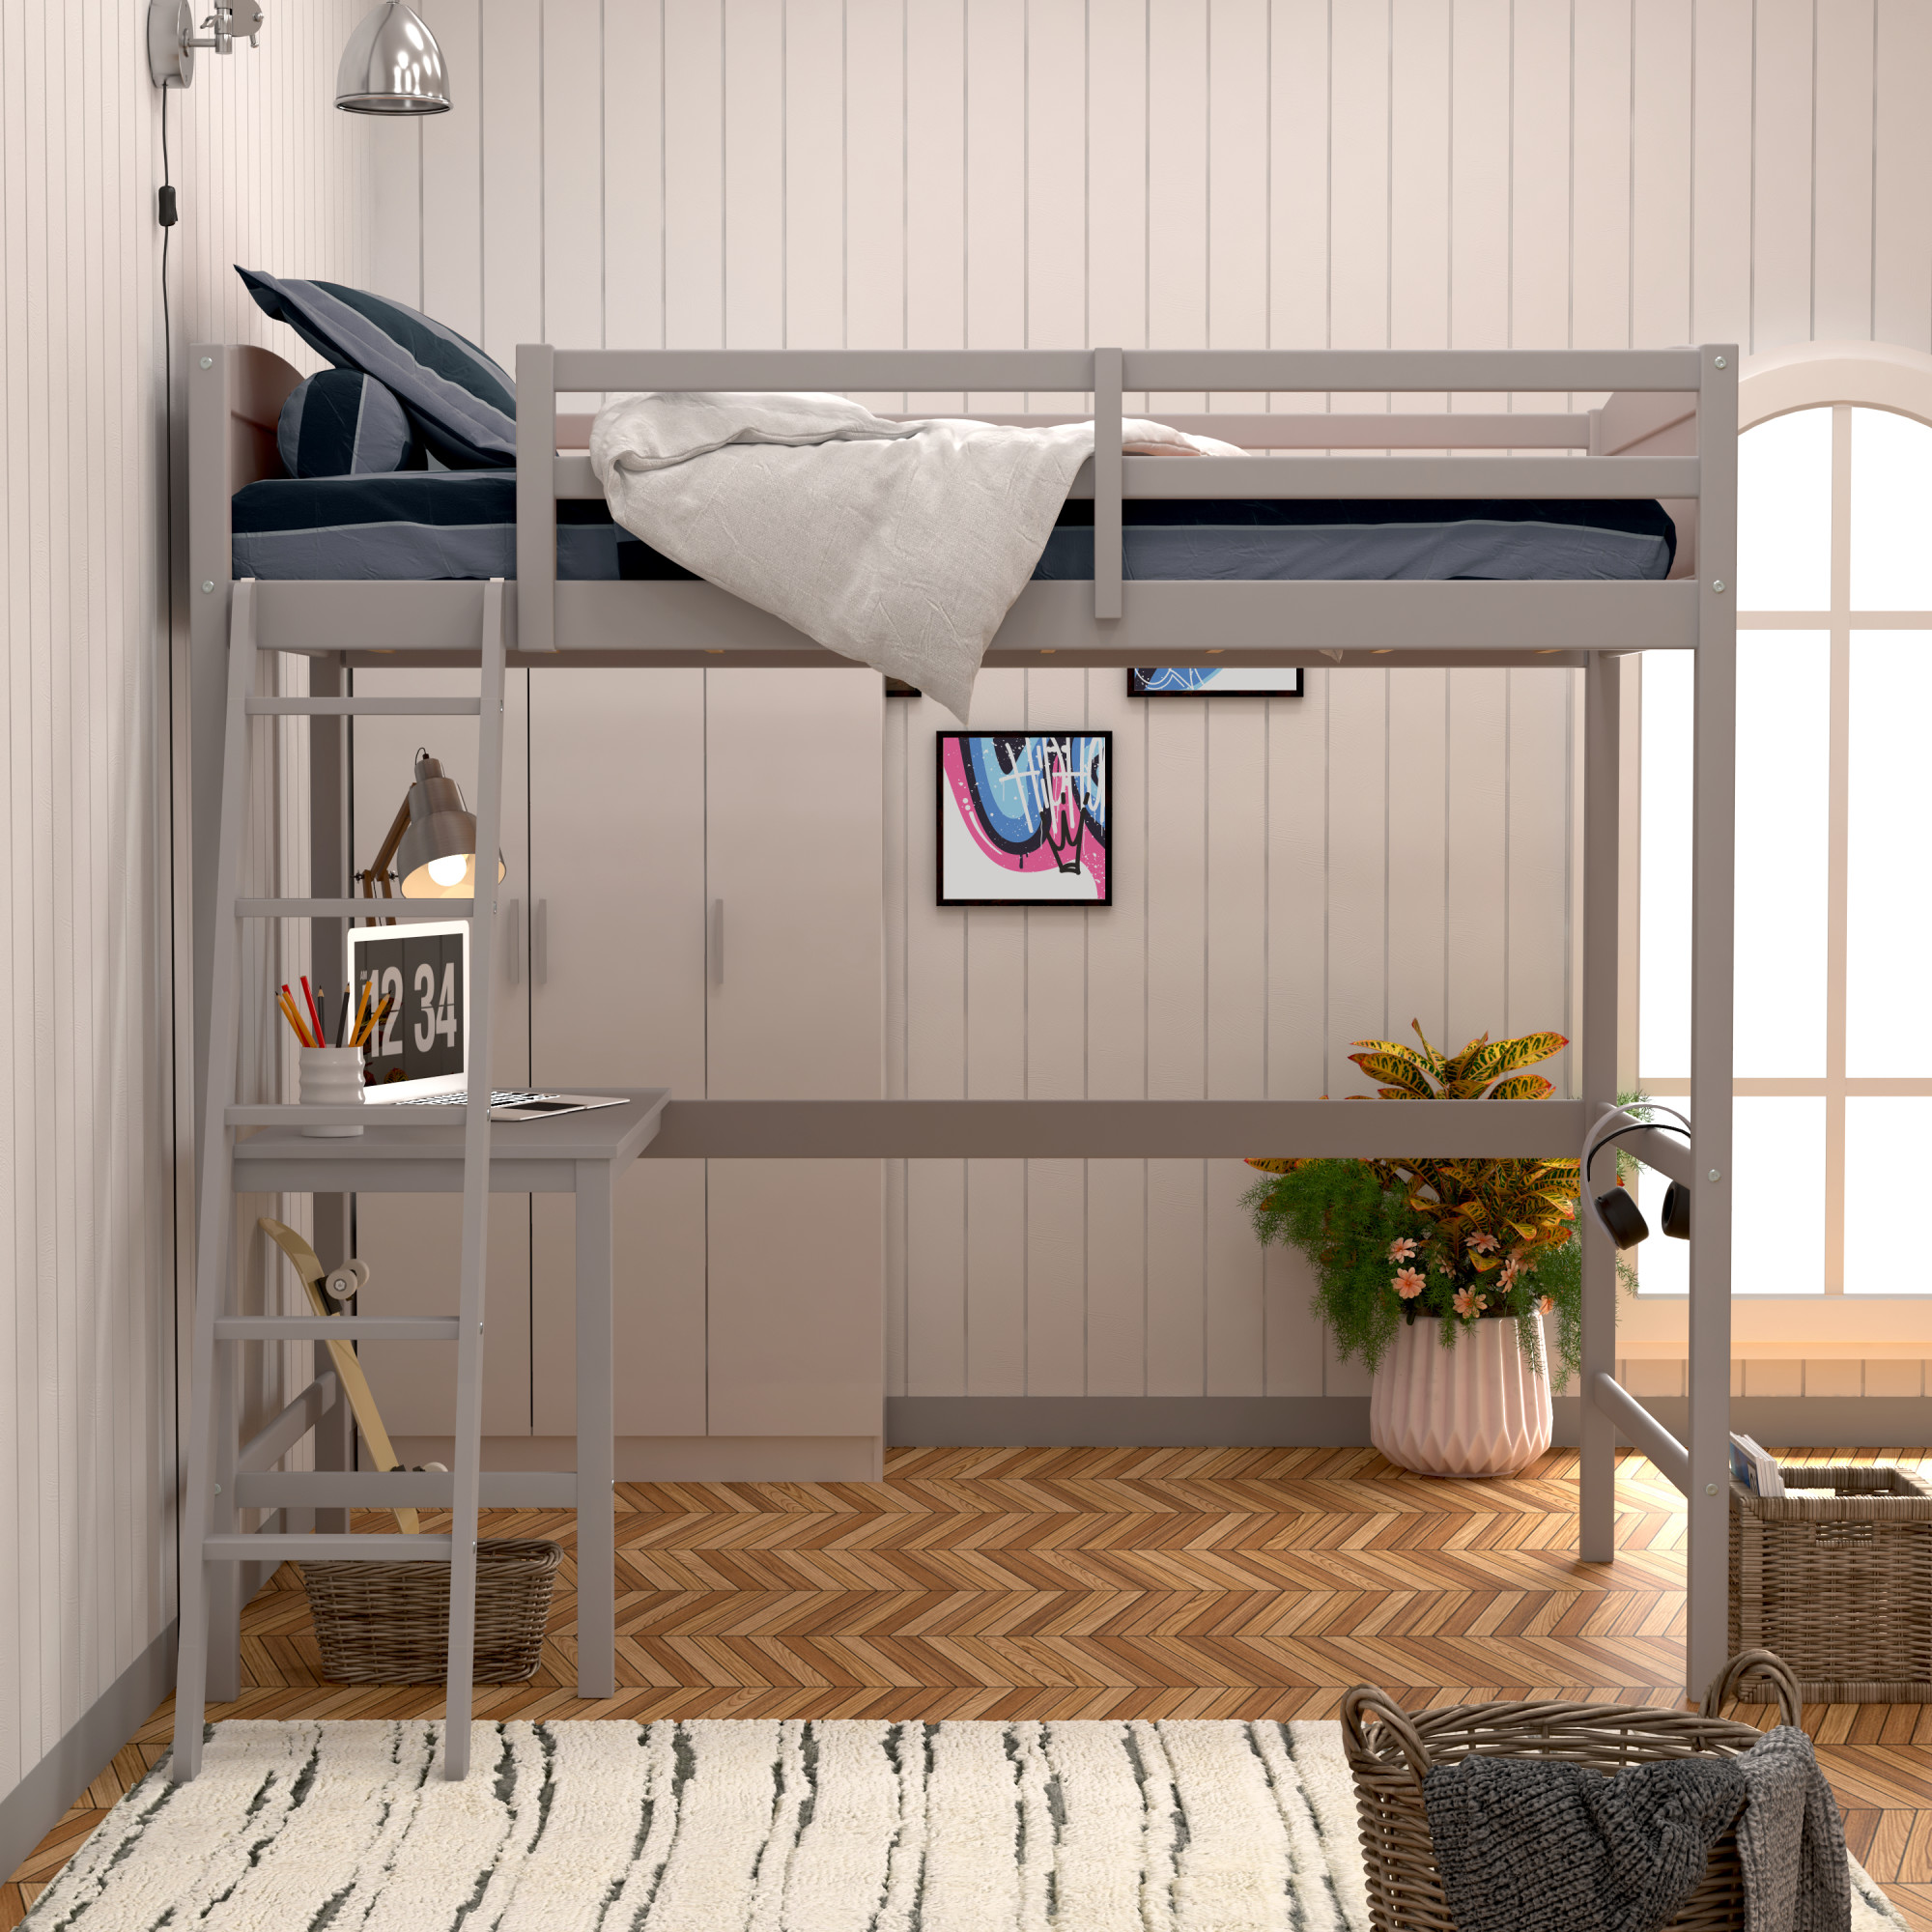 Living Essentials by Hillsdale Alexis Wood Arch Twin Loft Bed with Desk, Gray - image 5 of 16